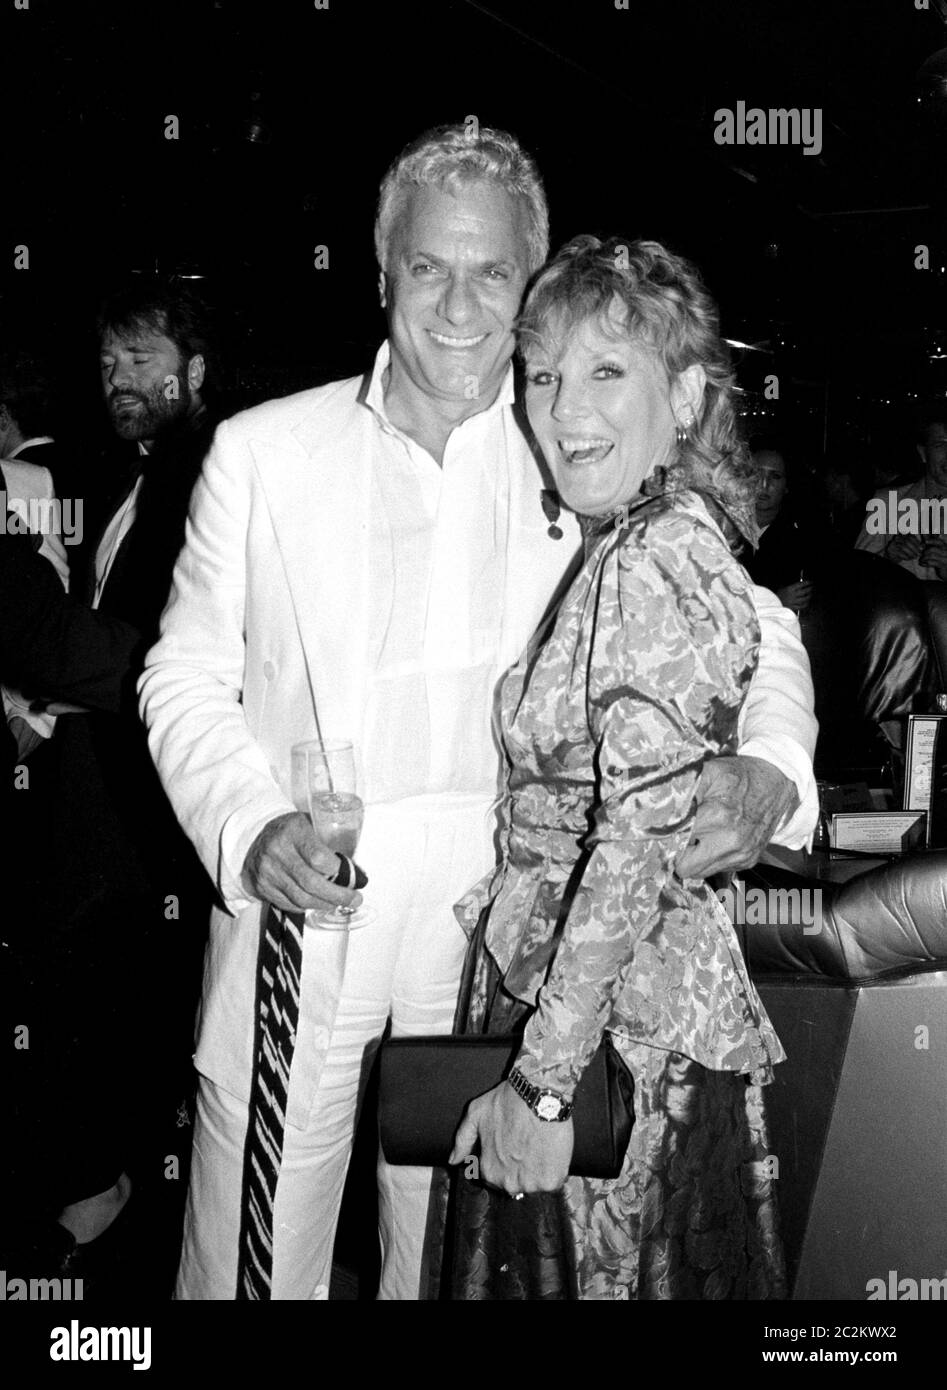 LONDON, UK. c. 1986: Actor Tony Curtis & singer Petula Clark at a party in London. © Paul Smith/Featureflash Stock Photo